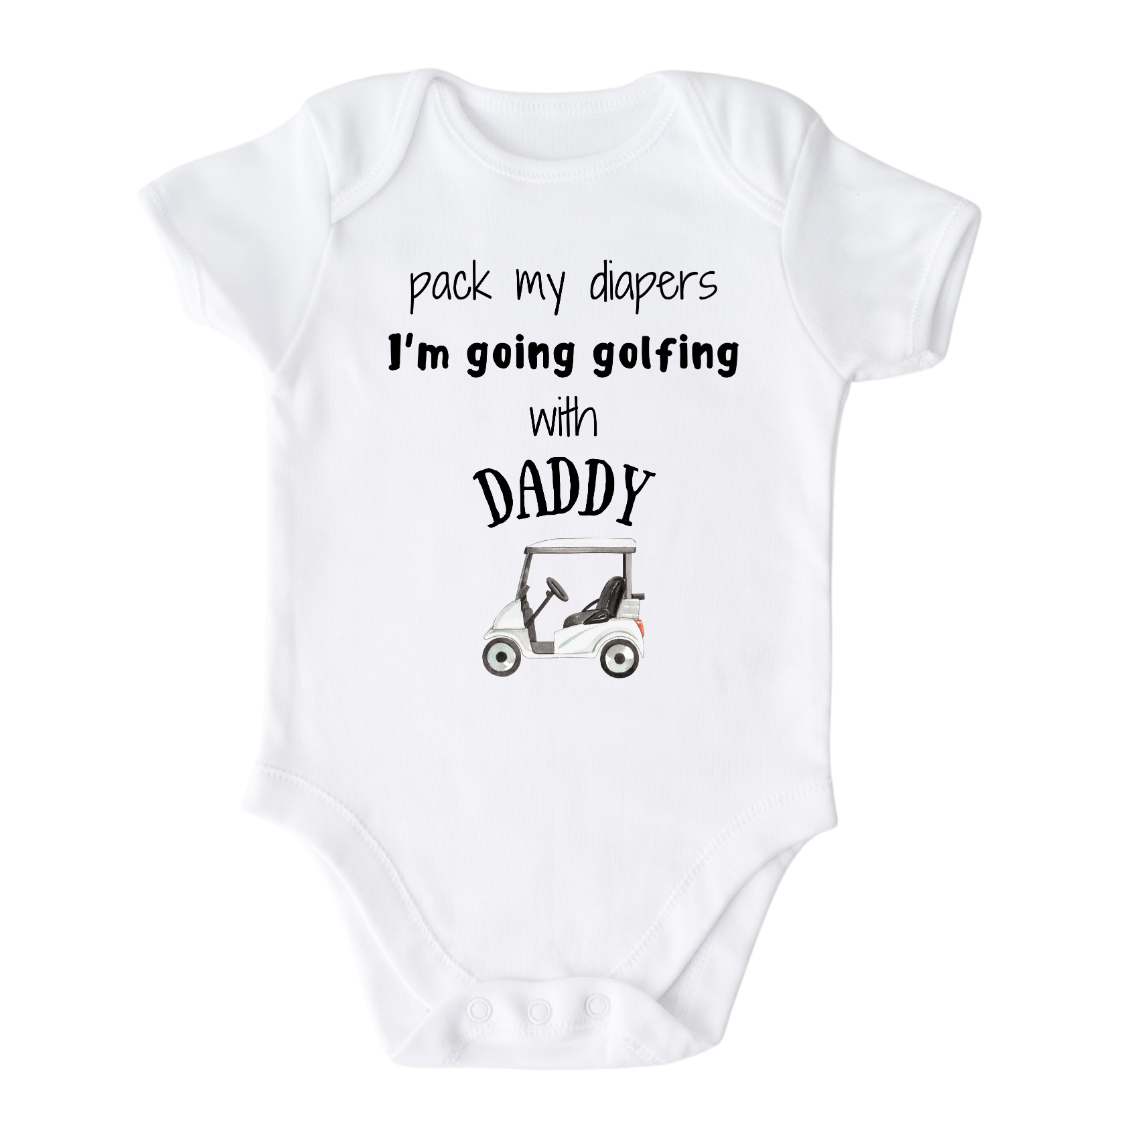 White Baby Onesie Baby Outfit featuring a cute printed graphic of a golf car with the text 'Pack My Diapers I'm going golfing with daddy.' This delightful t-shirt is perfect for little ones ready for a fun golfing adventure with their fathers.